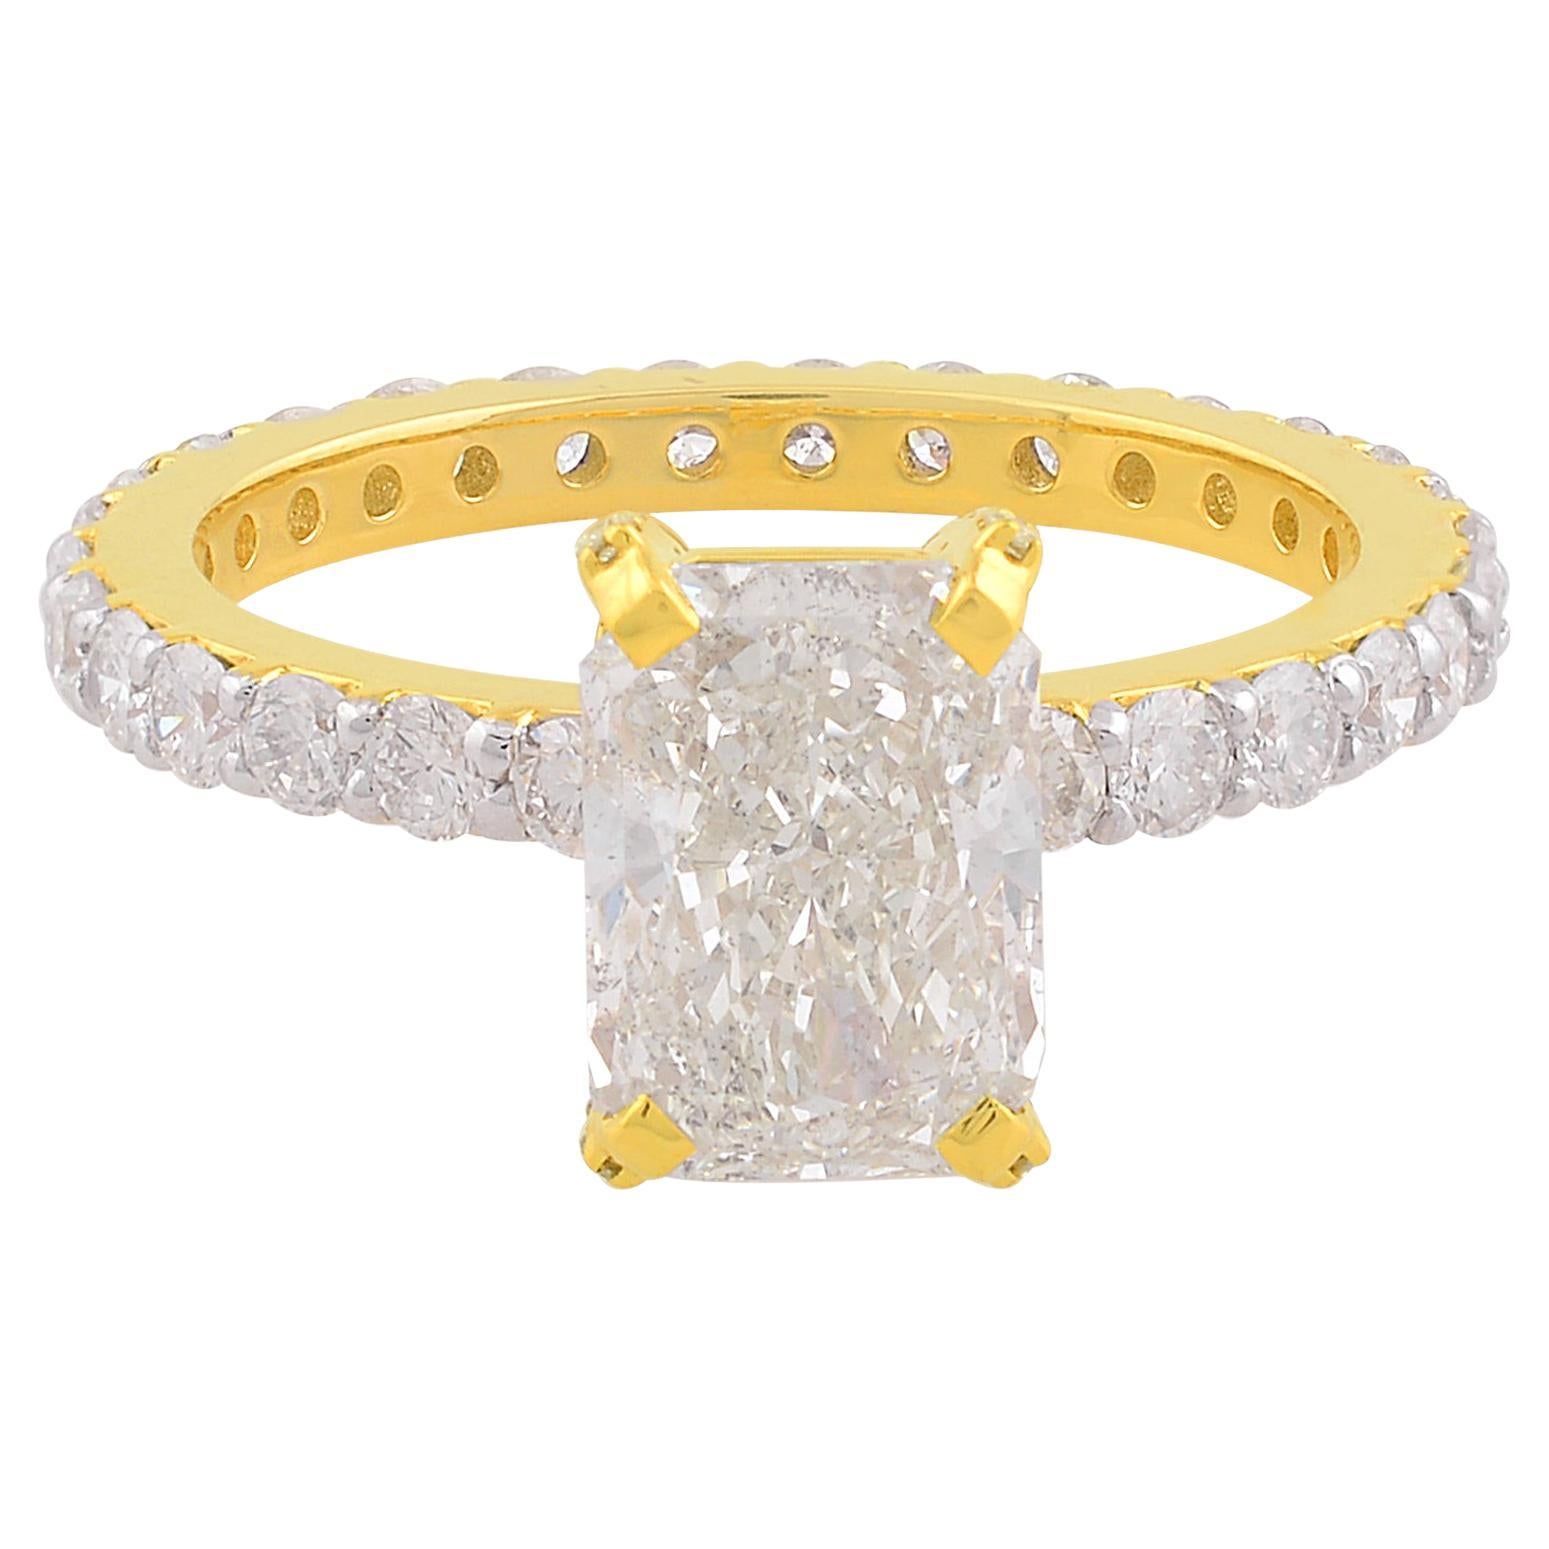 For Sale:  SI Clarity HI Color Solitaire Diamond Band Ring 18 Karat Yellow Gold Jewelry